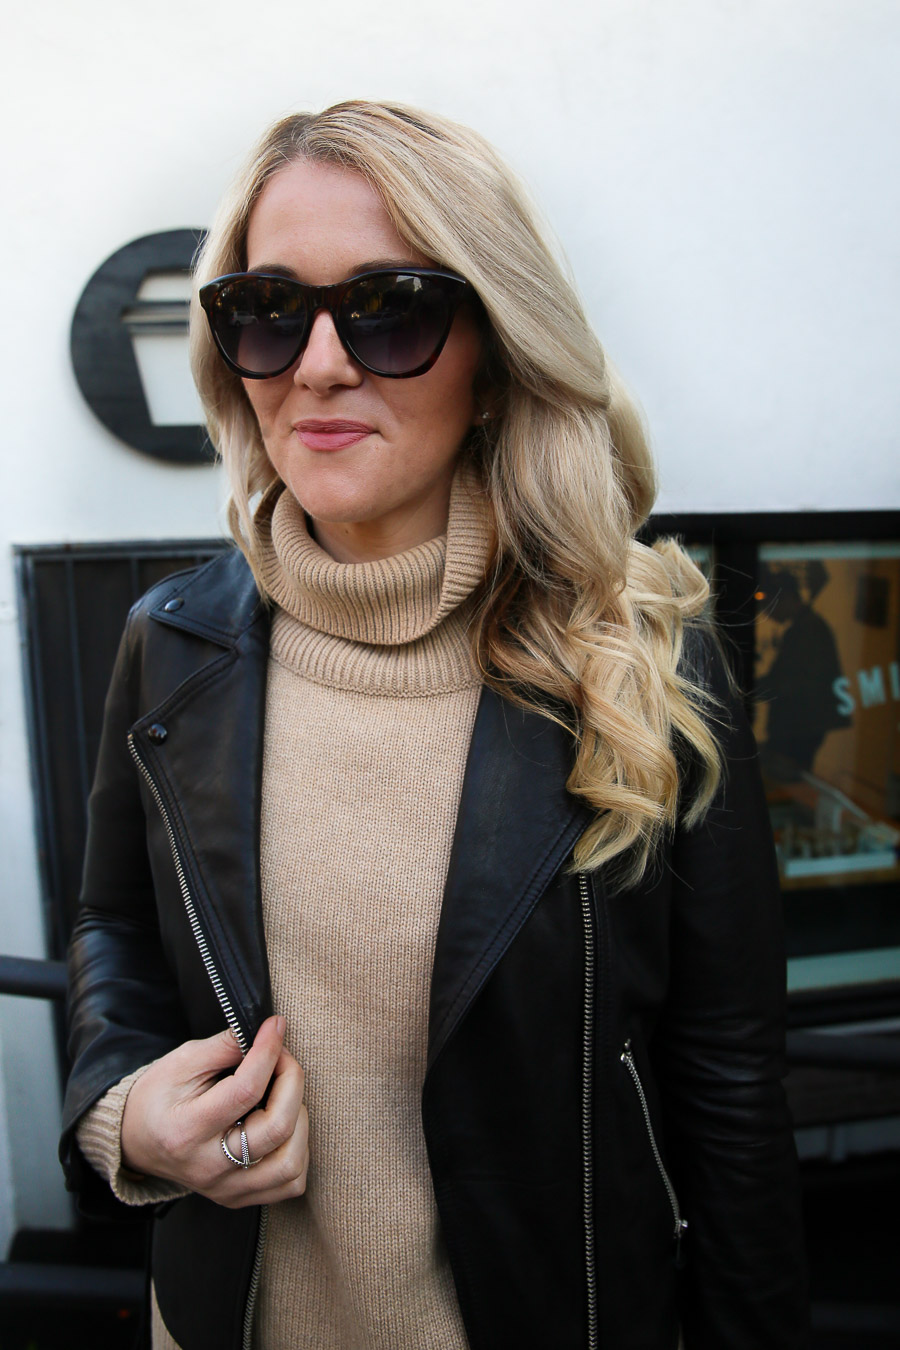 Turtleneck and Leather Jacket Outfit for Women